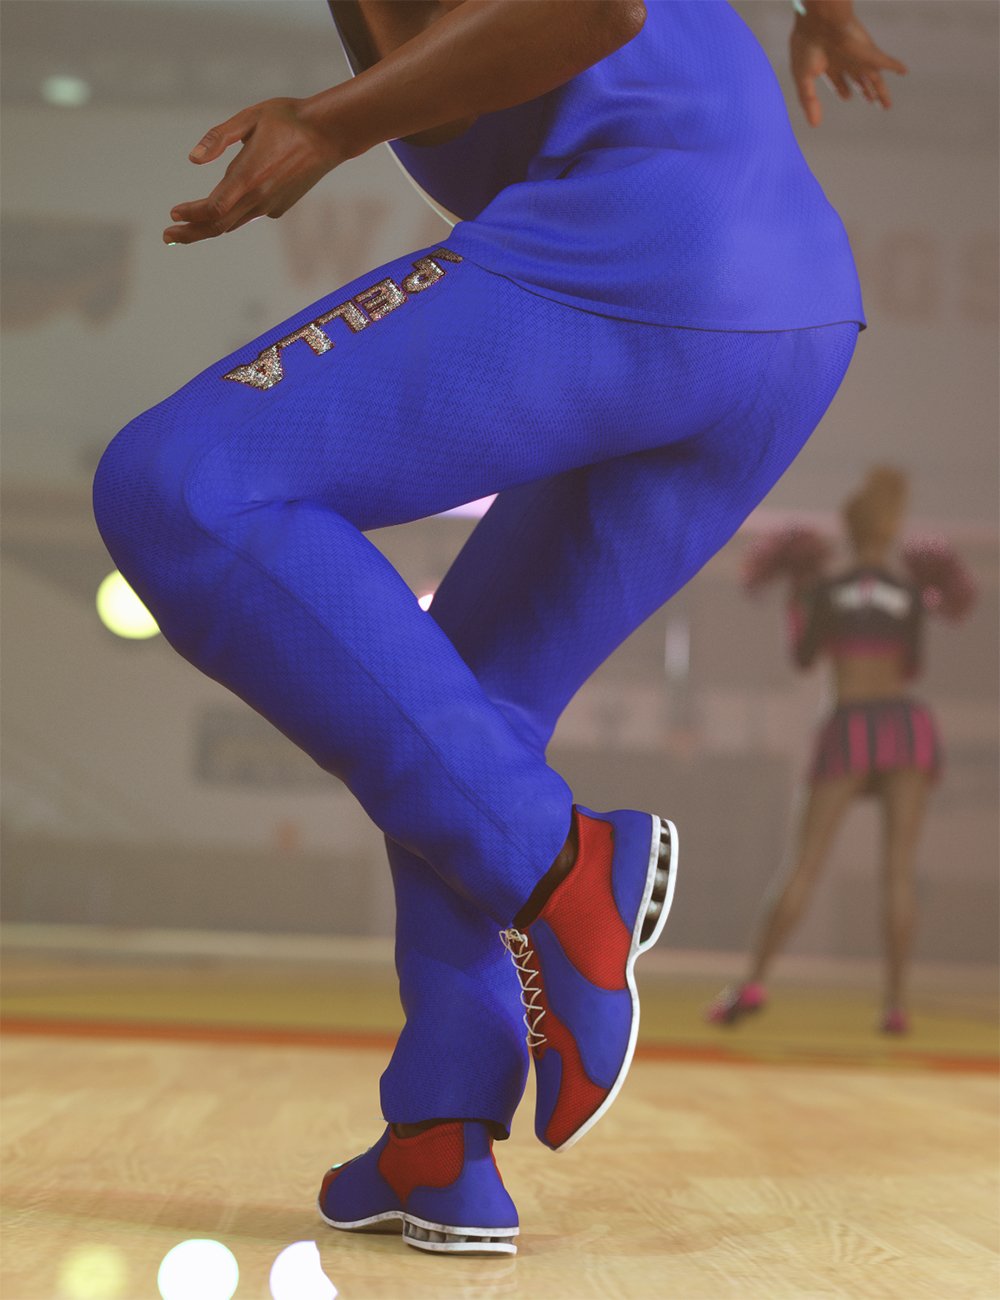 Cheerleading Squad Outfit Pants for Genesis 8 and 8.1 Males